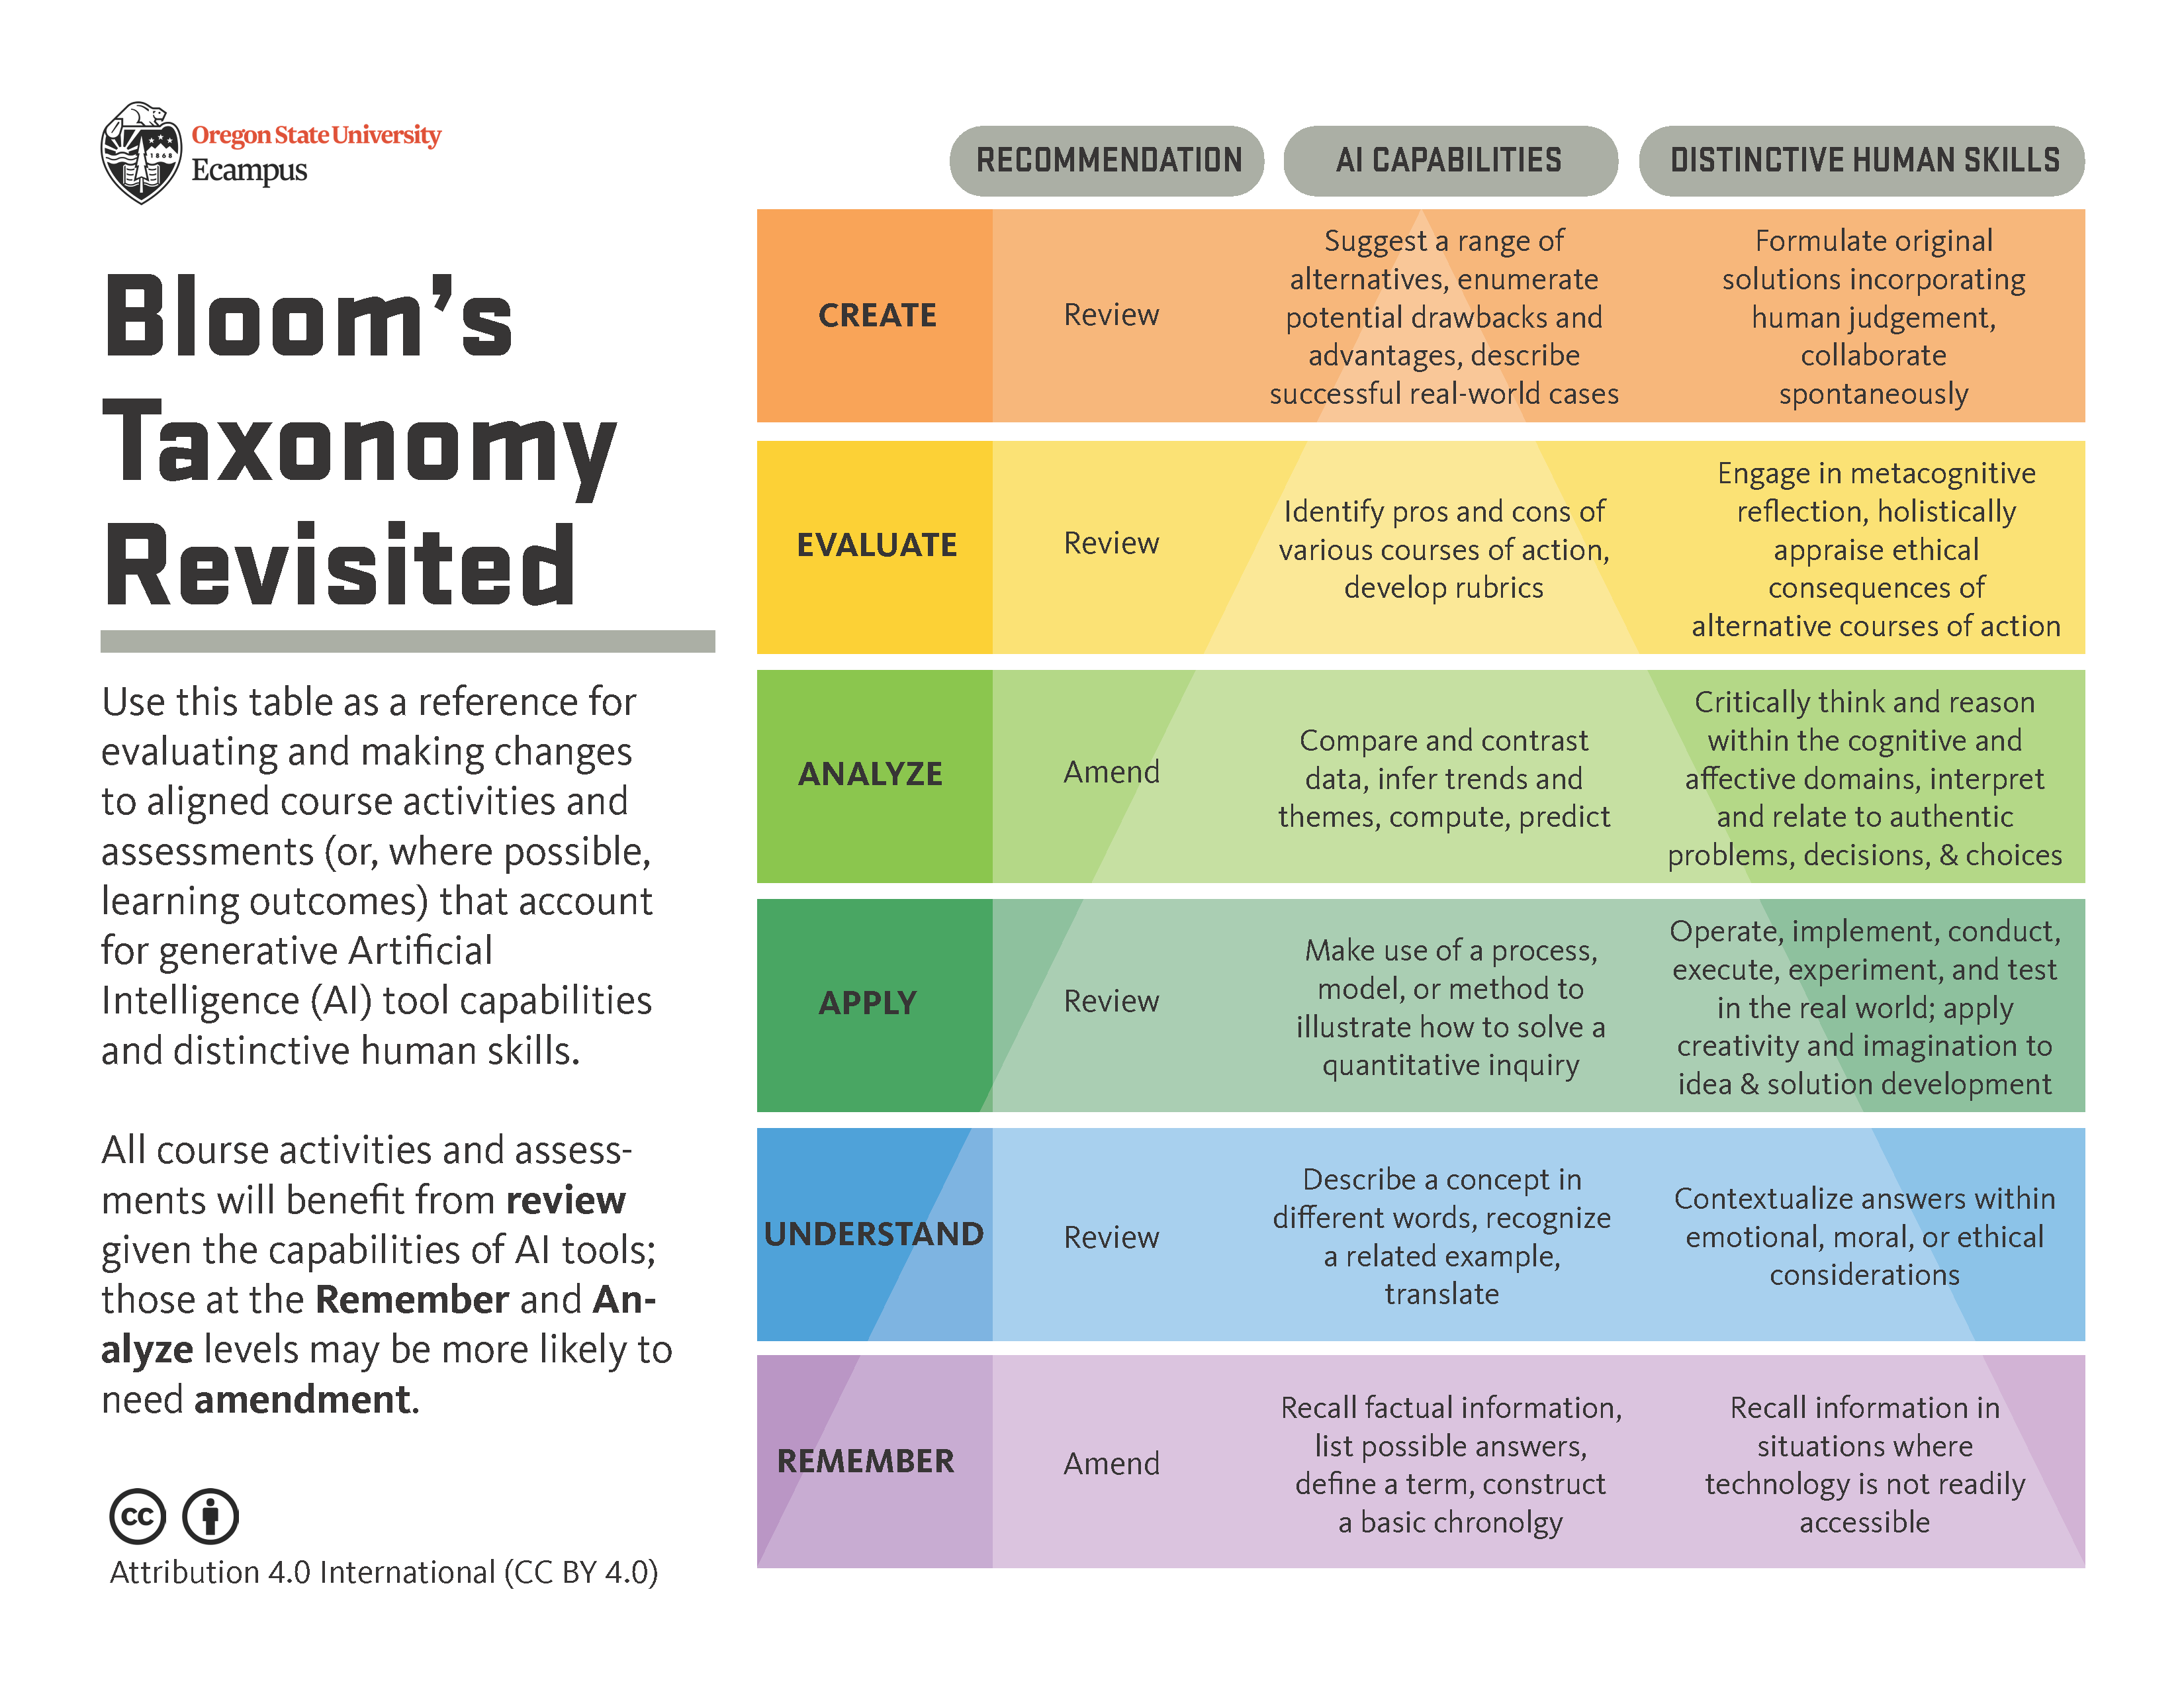 Screenshot of Bloom's Taxonomy Revisited